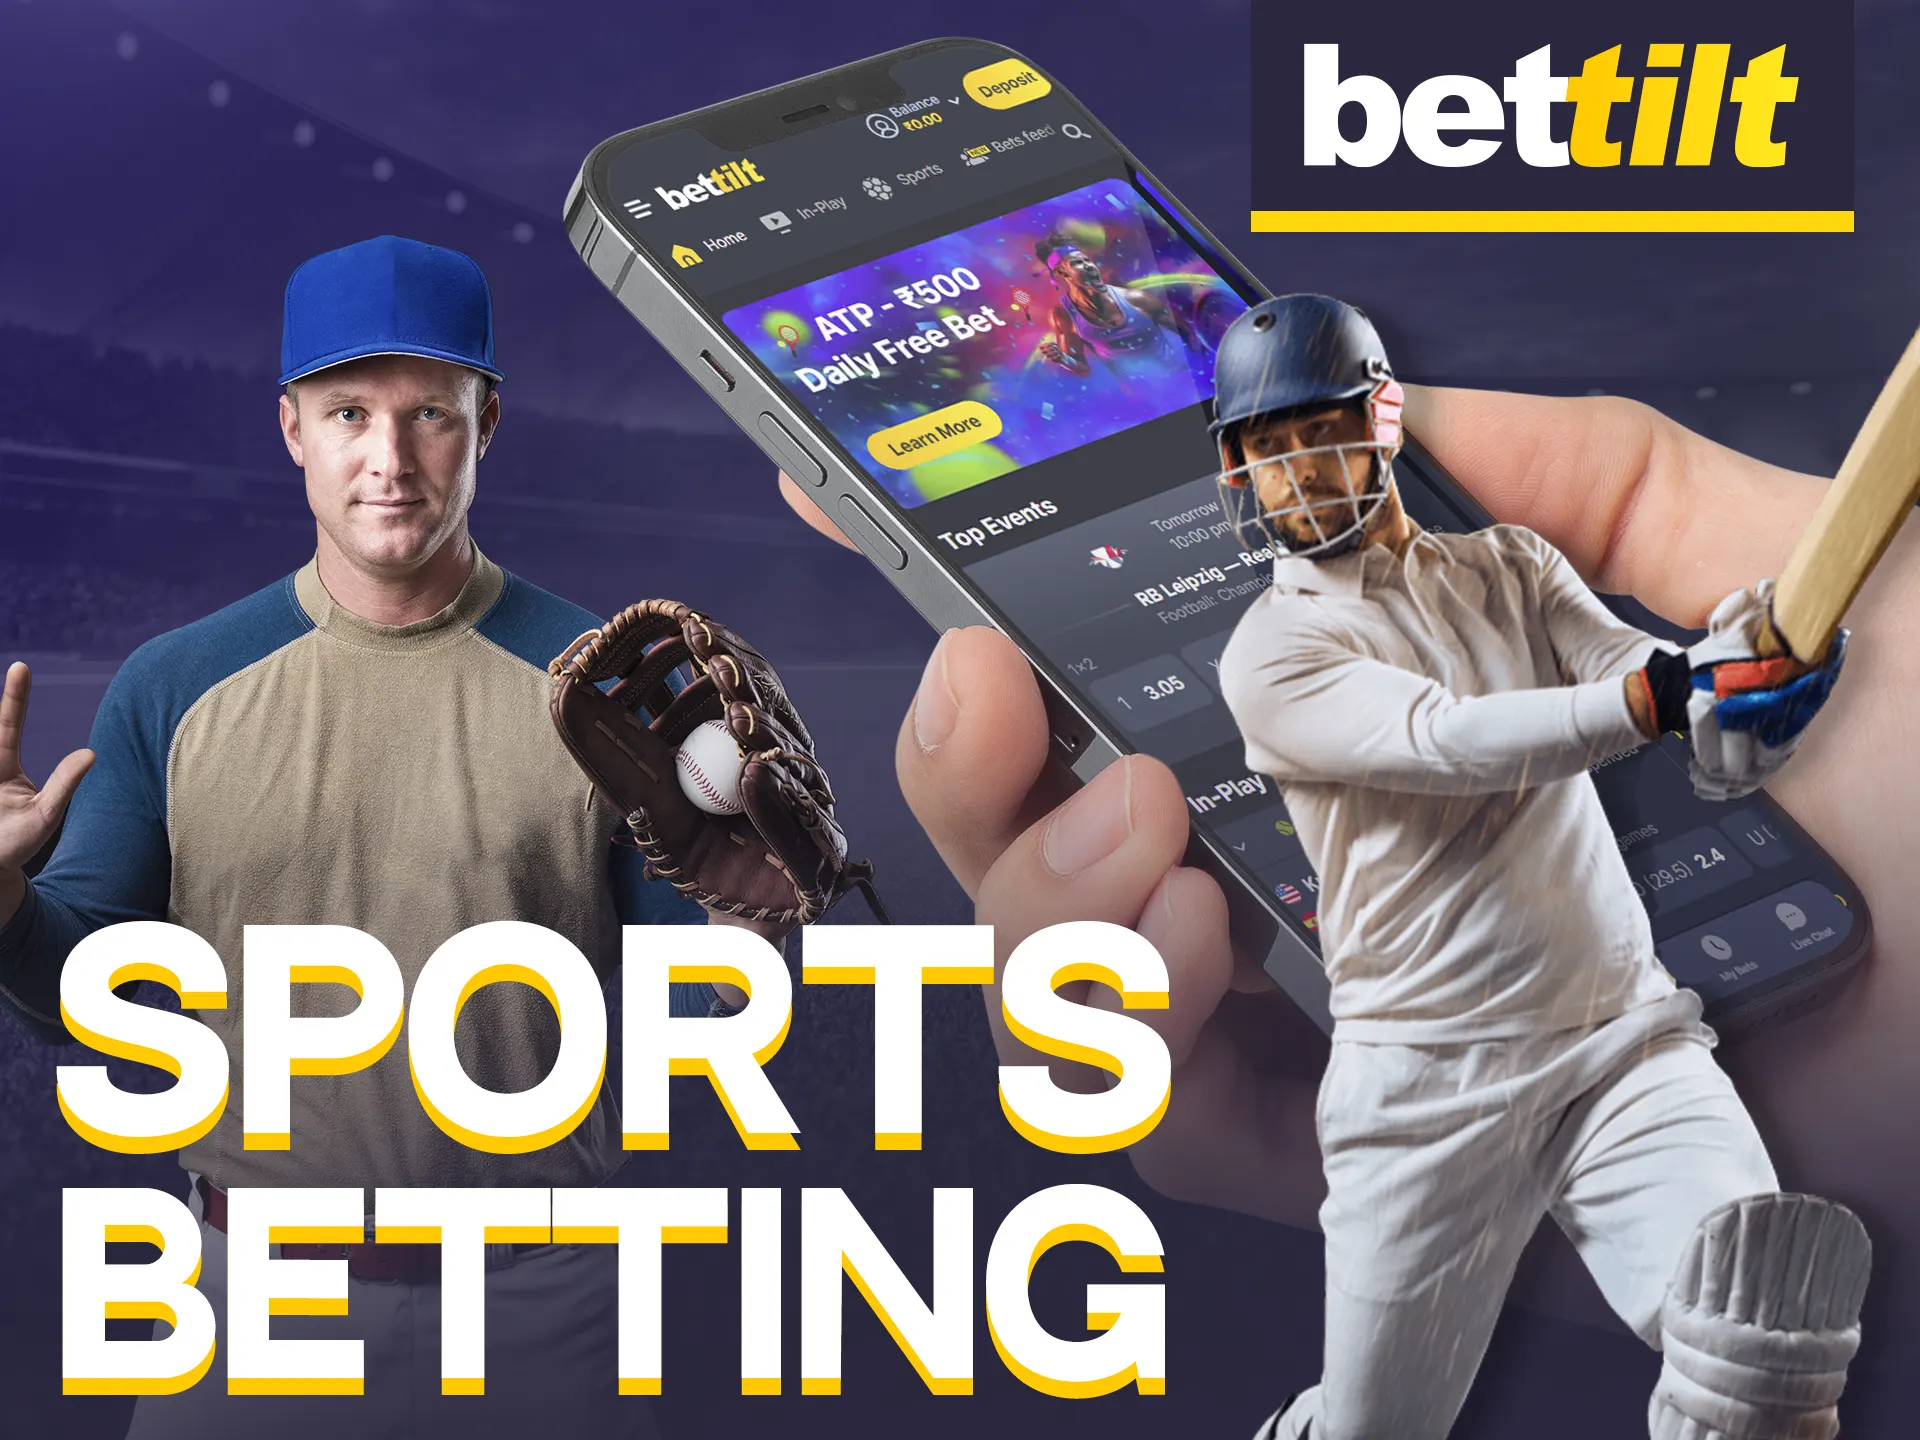 Bettilt app offers sports betting on various events.